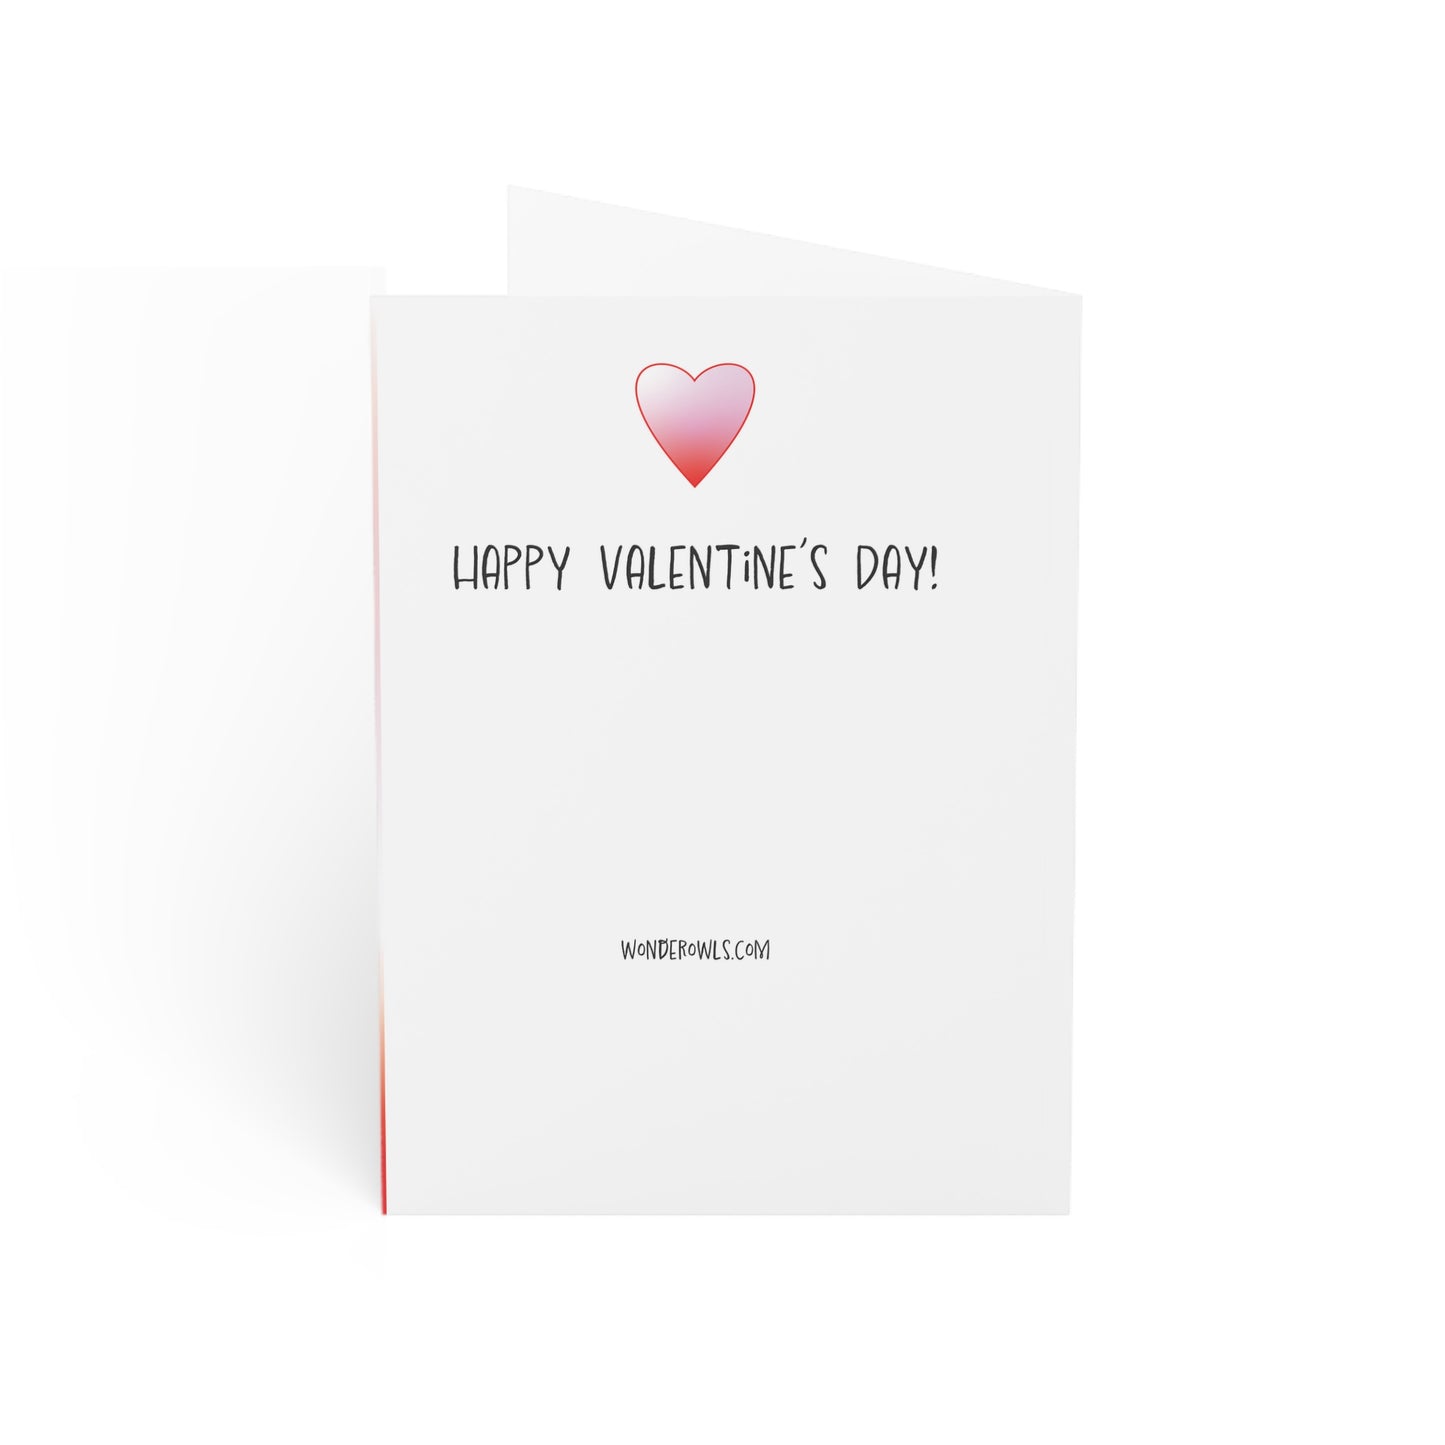 Valentines Day Greeting Cards From One Little Devil to Another (1, 10, 30, and 50pcs)